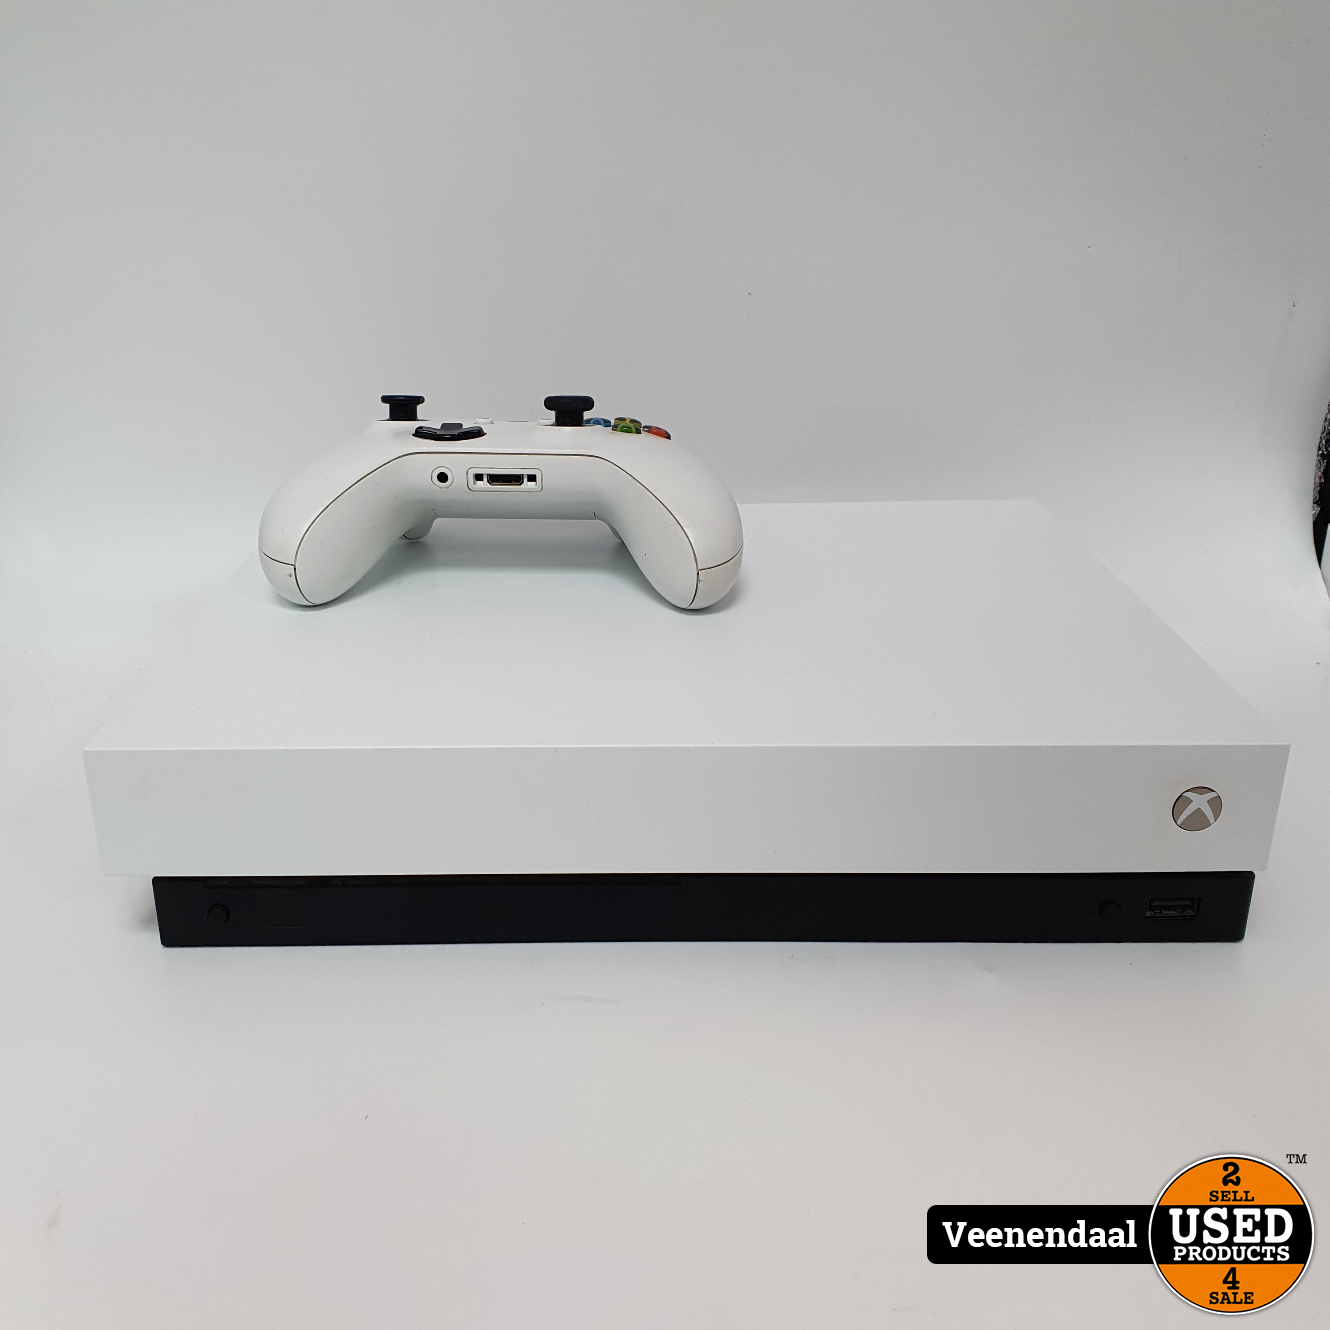 Neuropathie Symfonie Betreffende Xbox One X 1TB Incl. Controller in Zeer Nette Staat - Used Products  Veenendaal